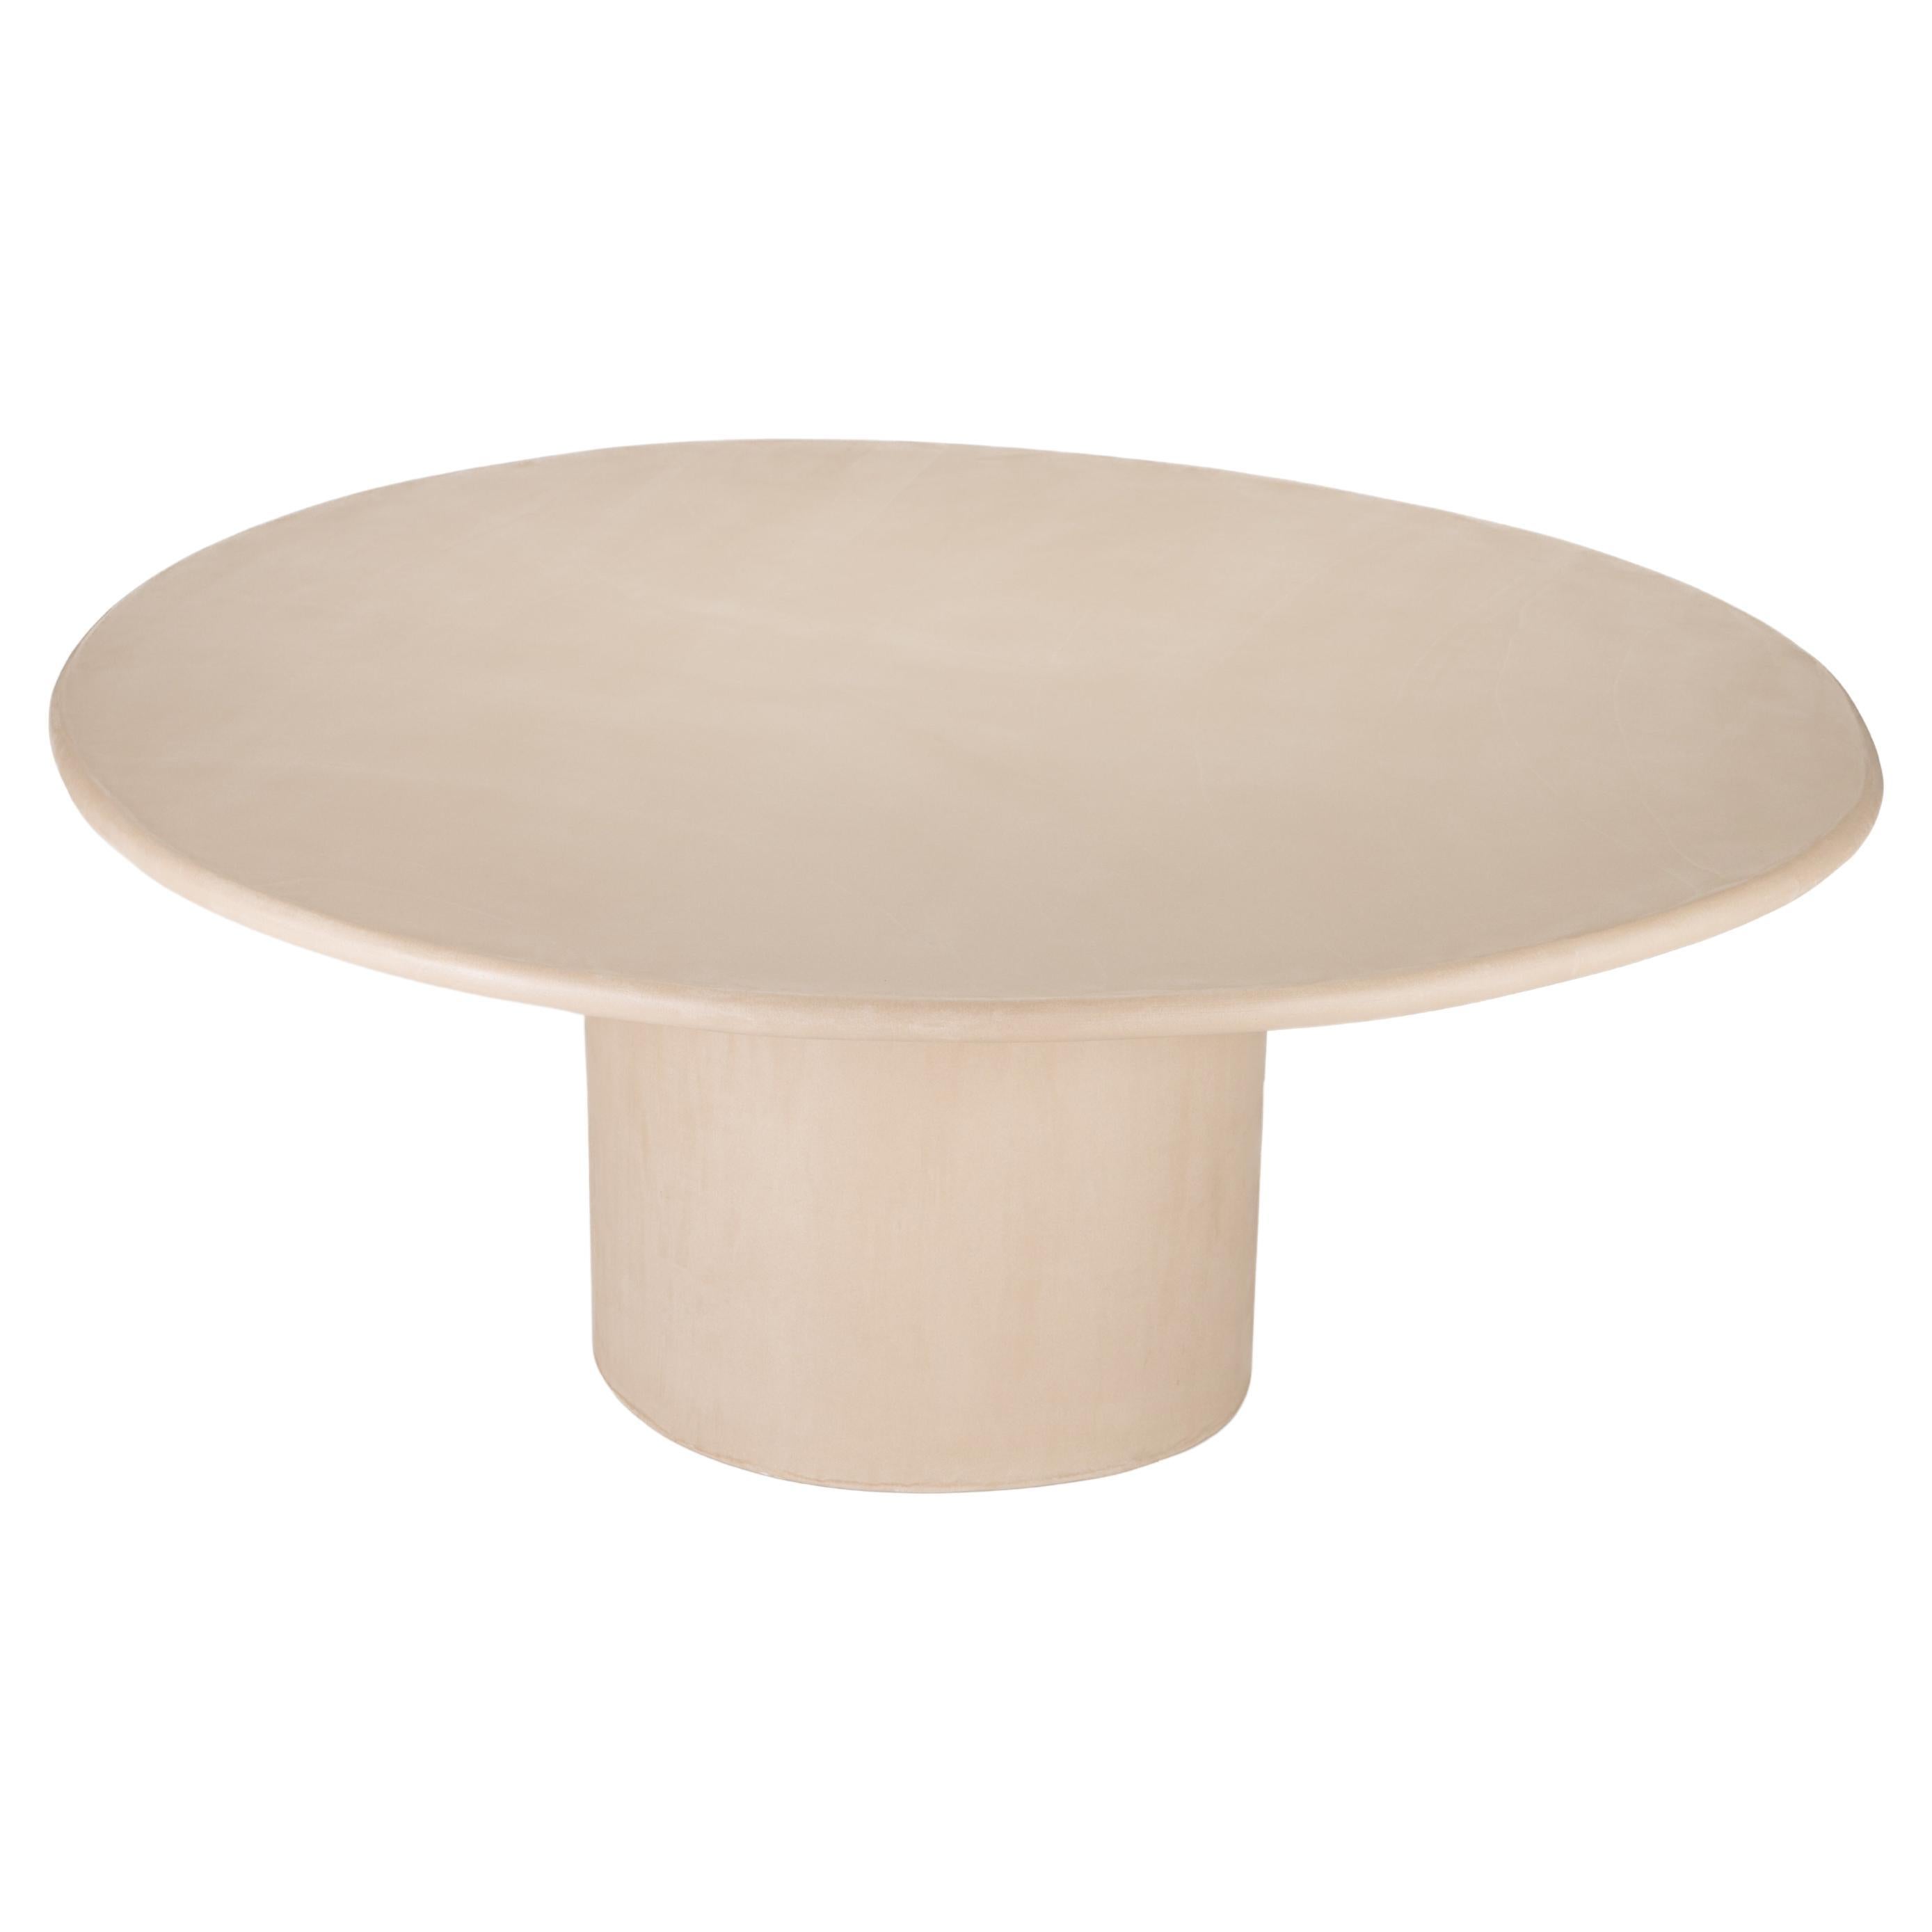 Organic Shaped Mortex Dining Table "Sami" 170 by Isabelle Beaumont